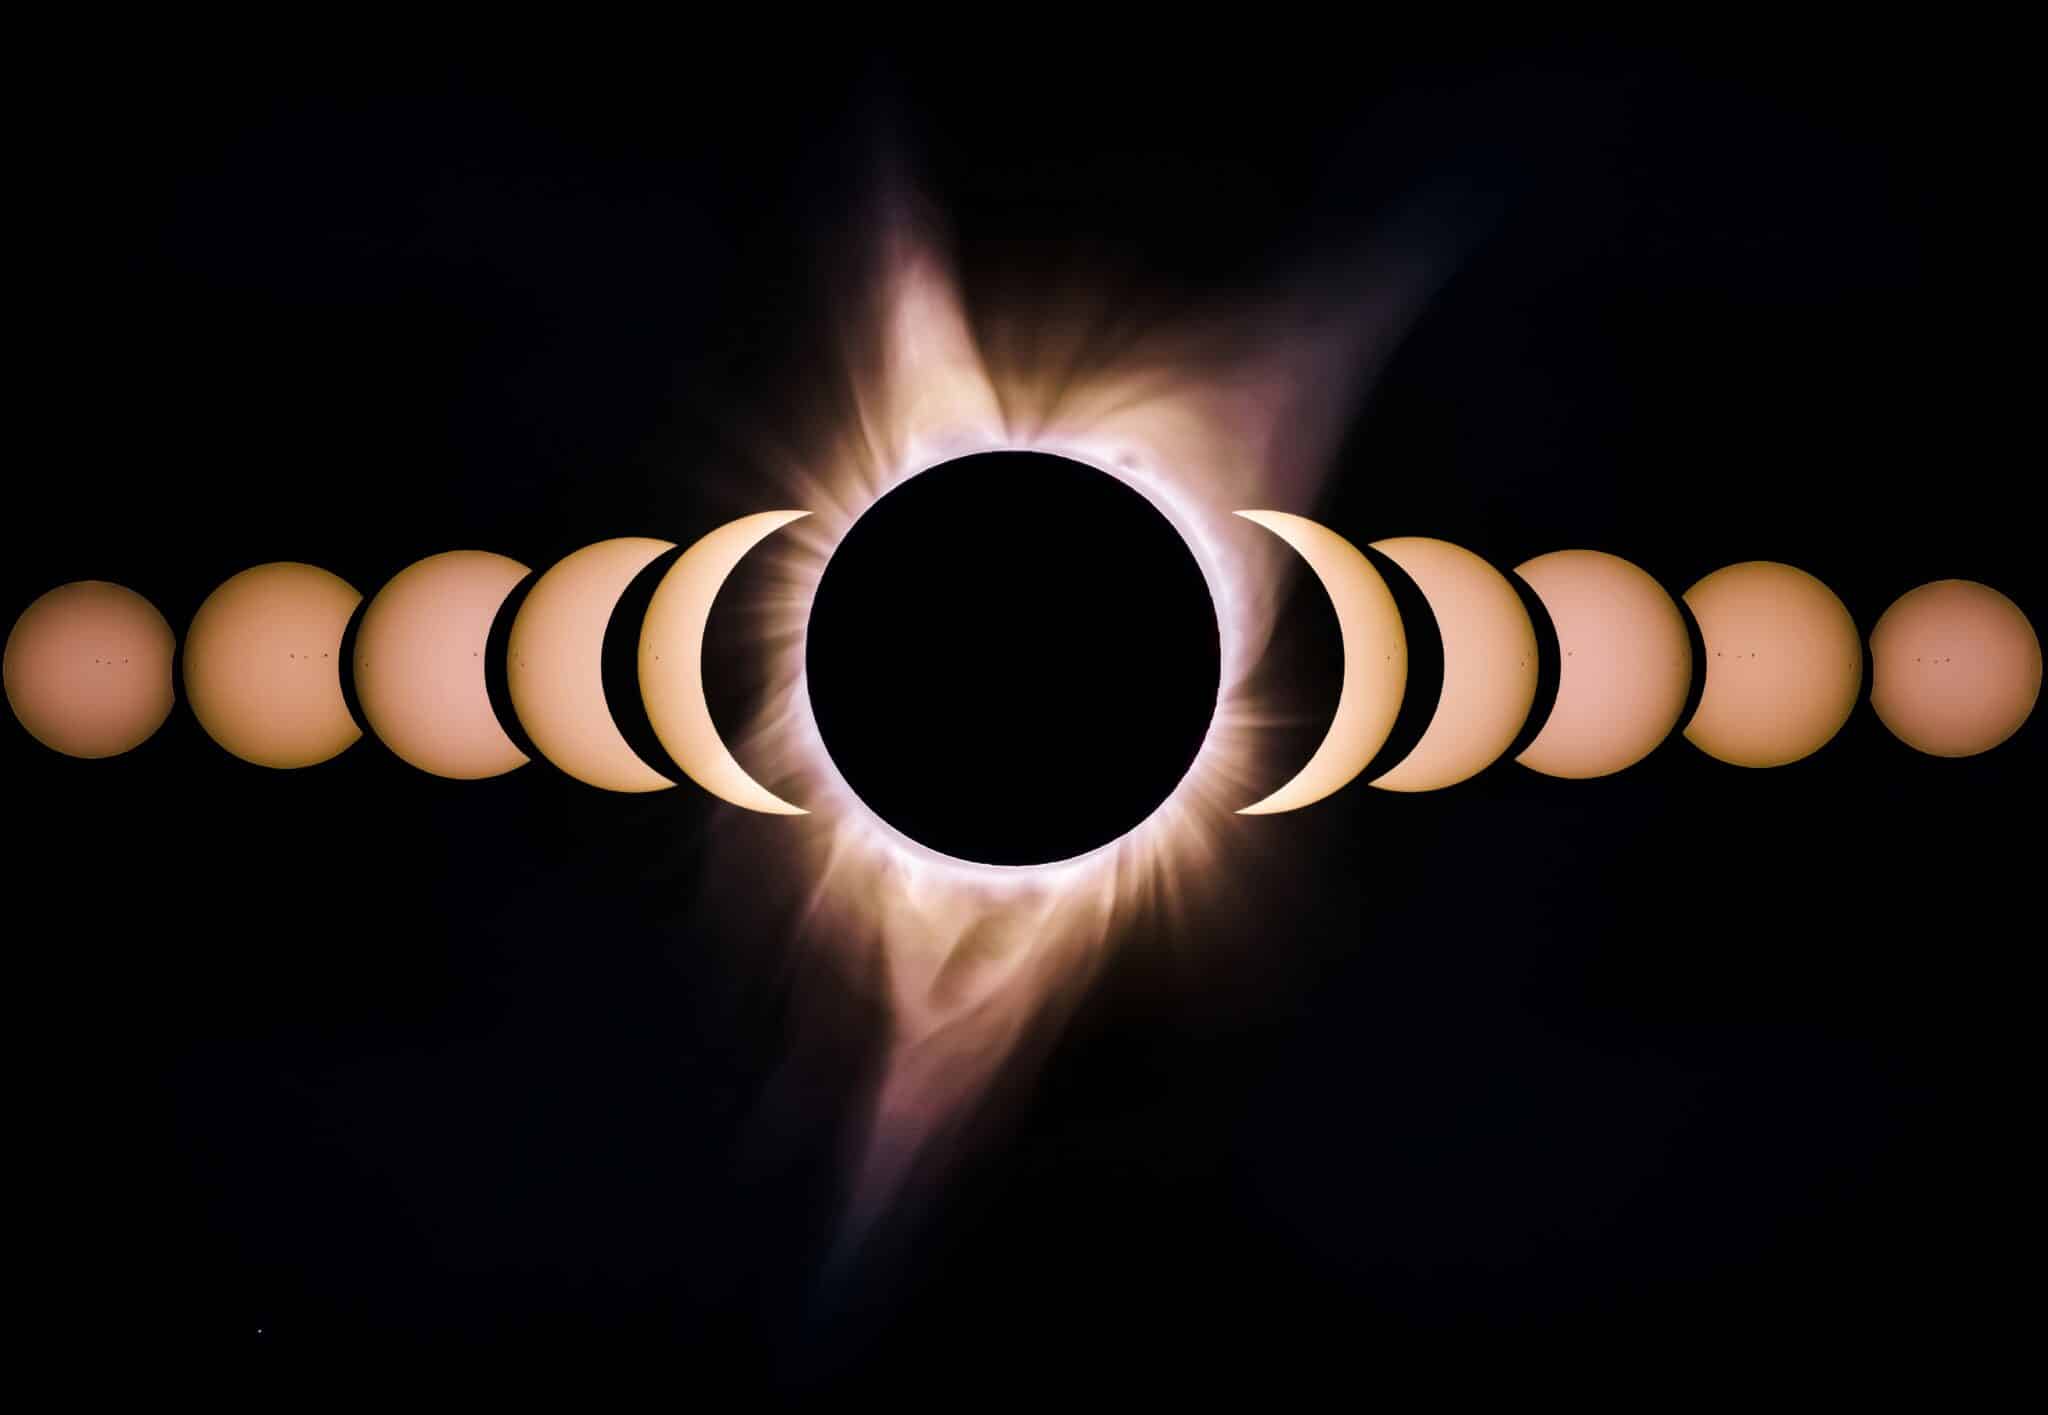 phases of a solar eclipse | Photo by Bryan Goff on Unsplash